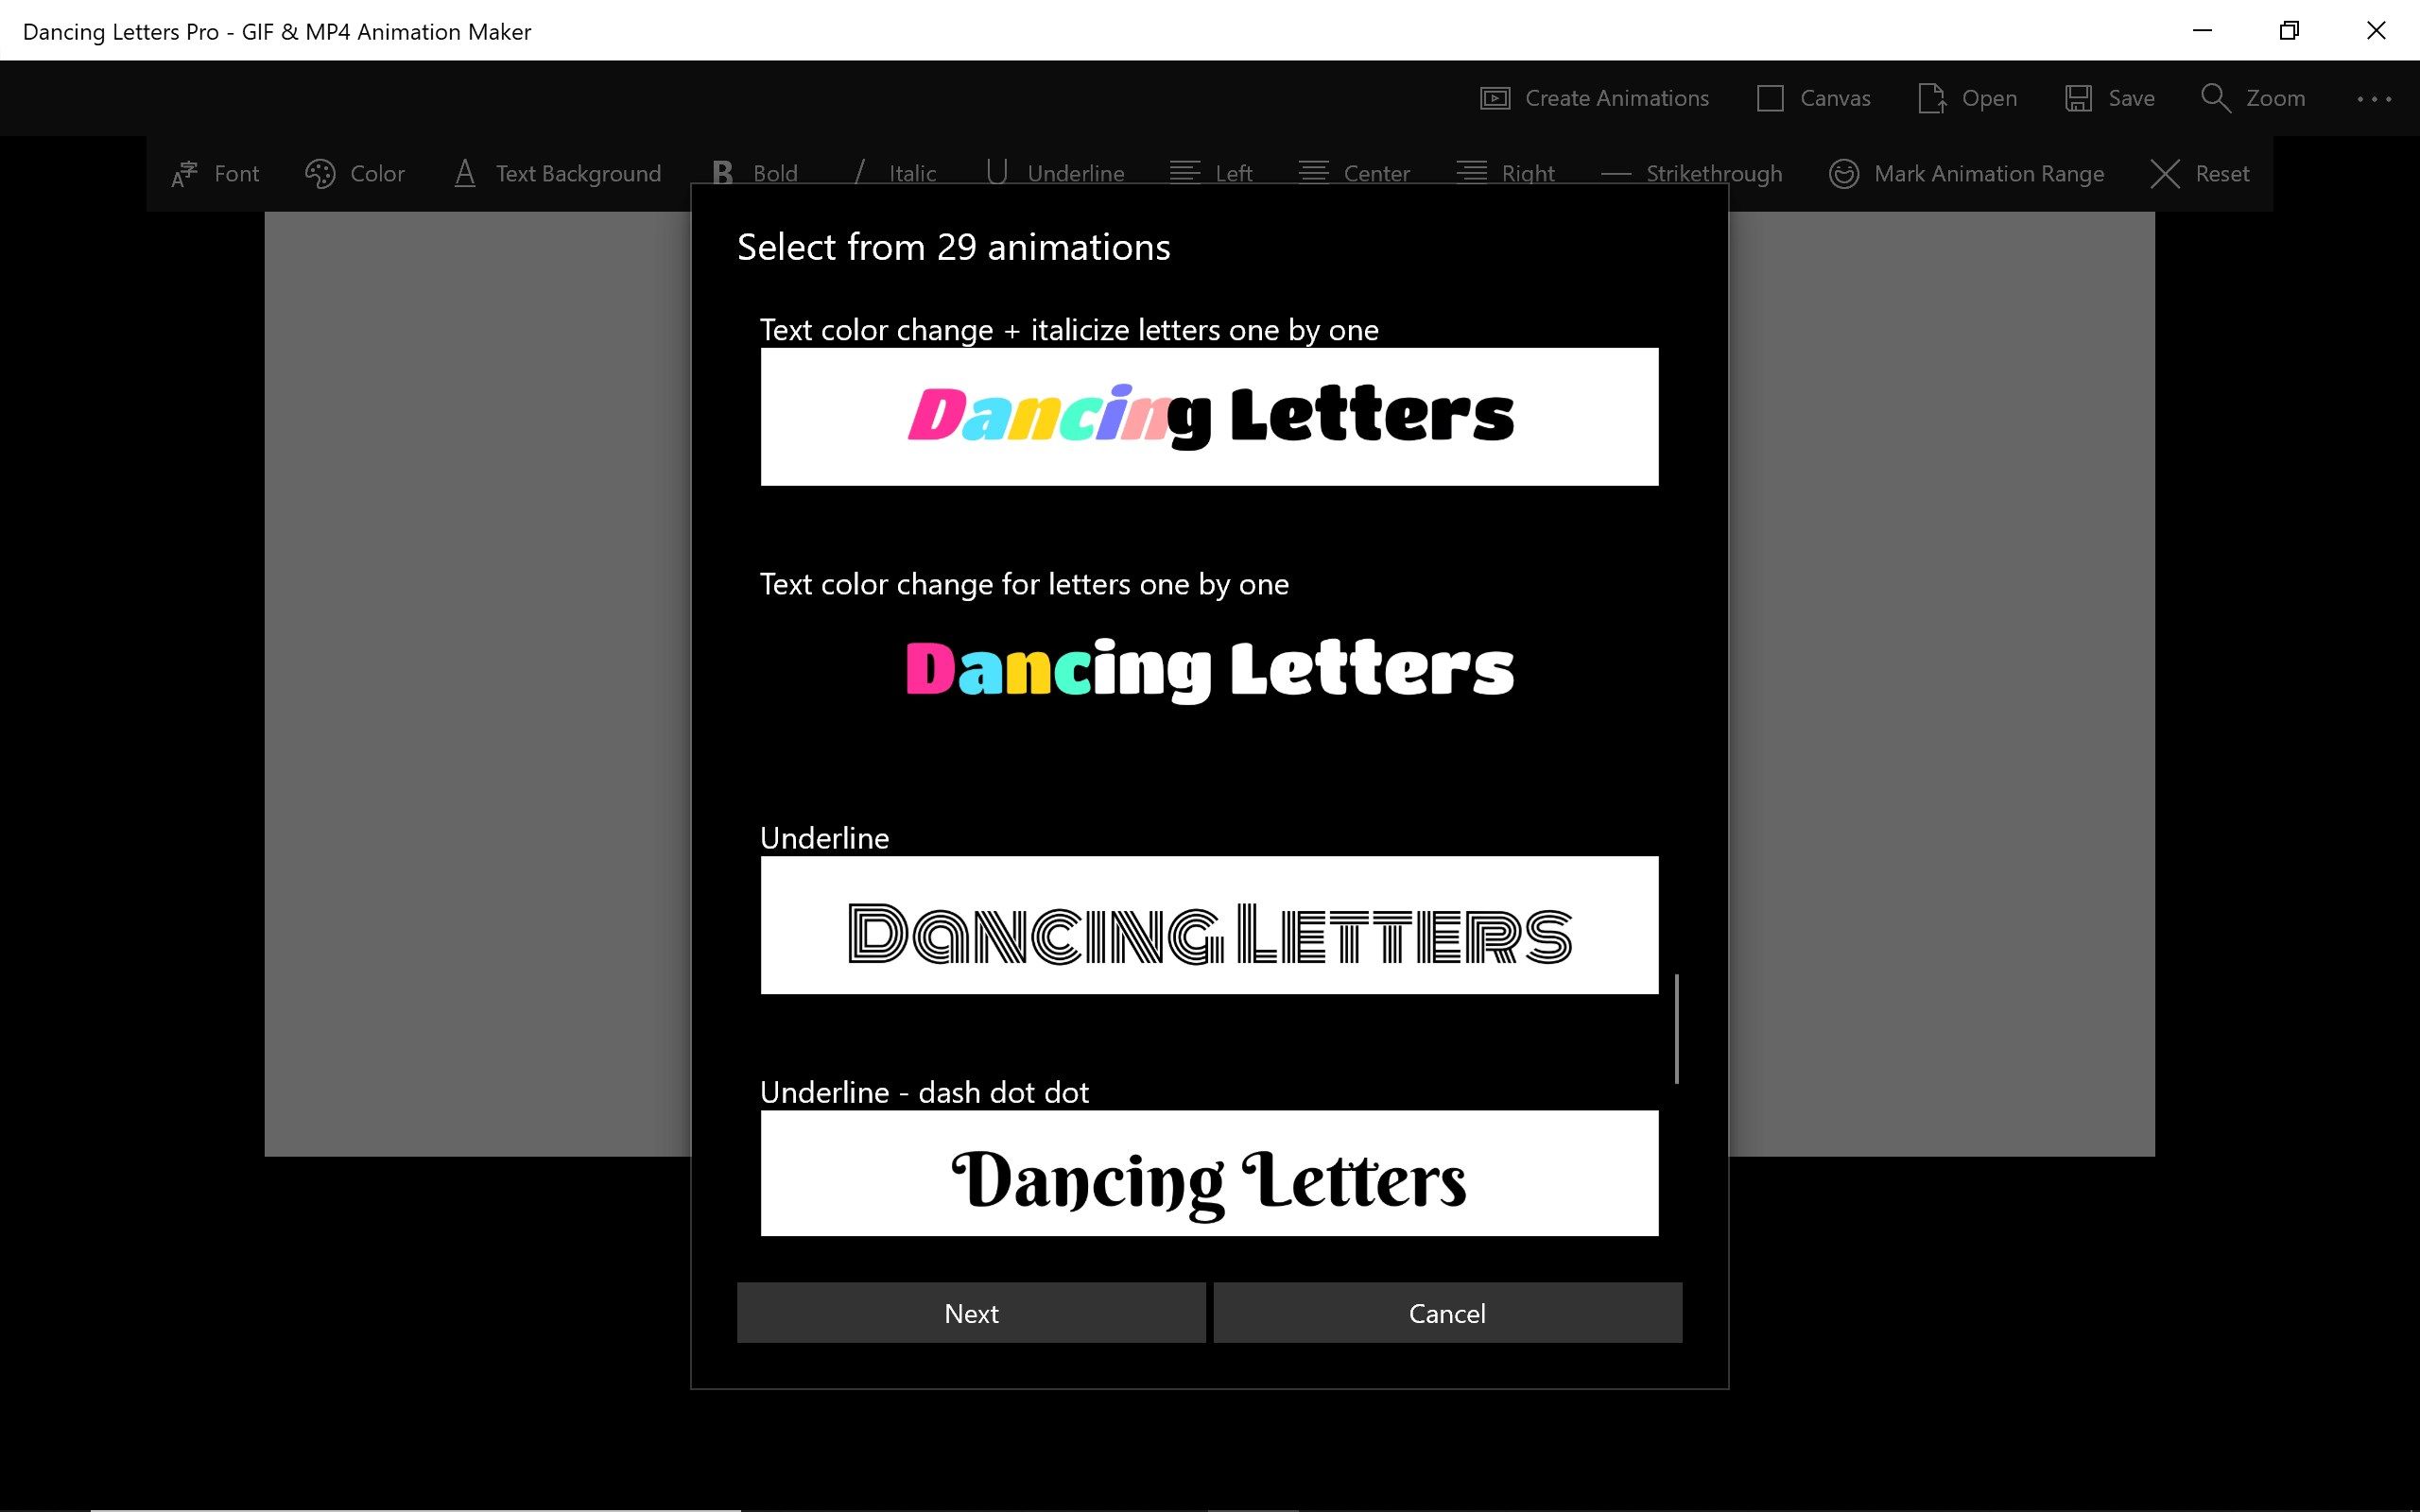 Dancing Letters Pro - GIF & MP4 Animation Maker